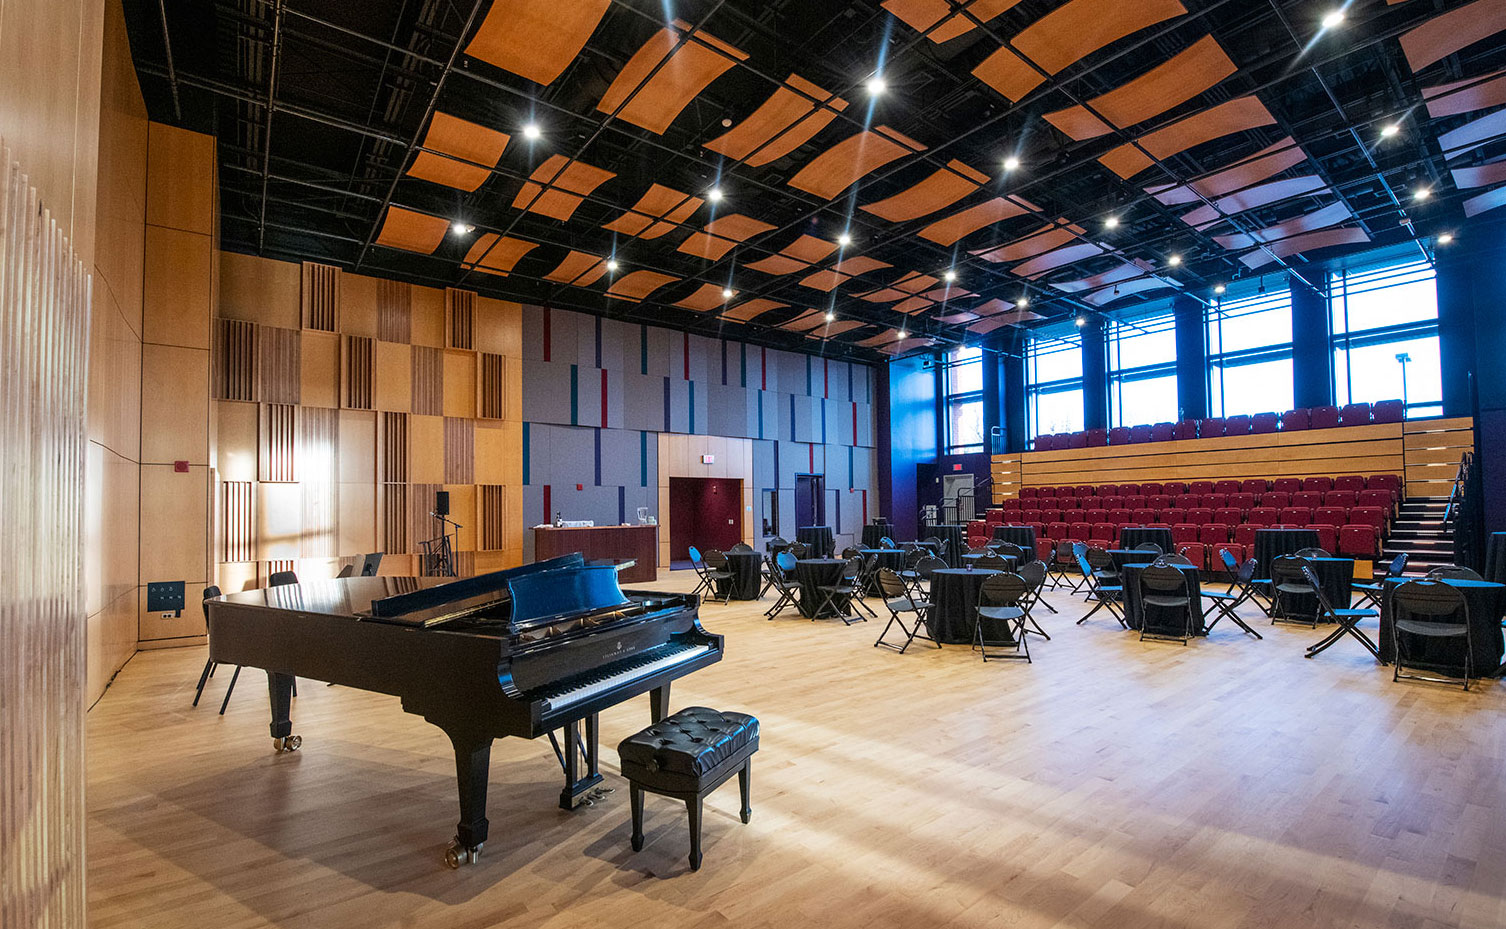 Large Rehearsal Hall inside the new Education and Rehearsal Wing at the Hylton Performing Arts Center.